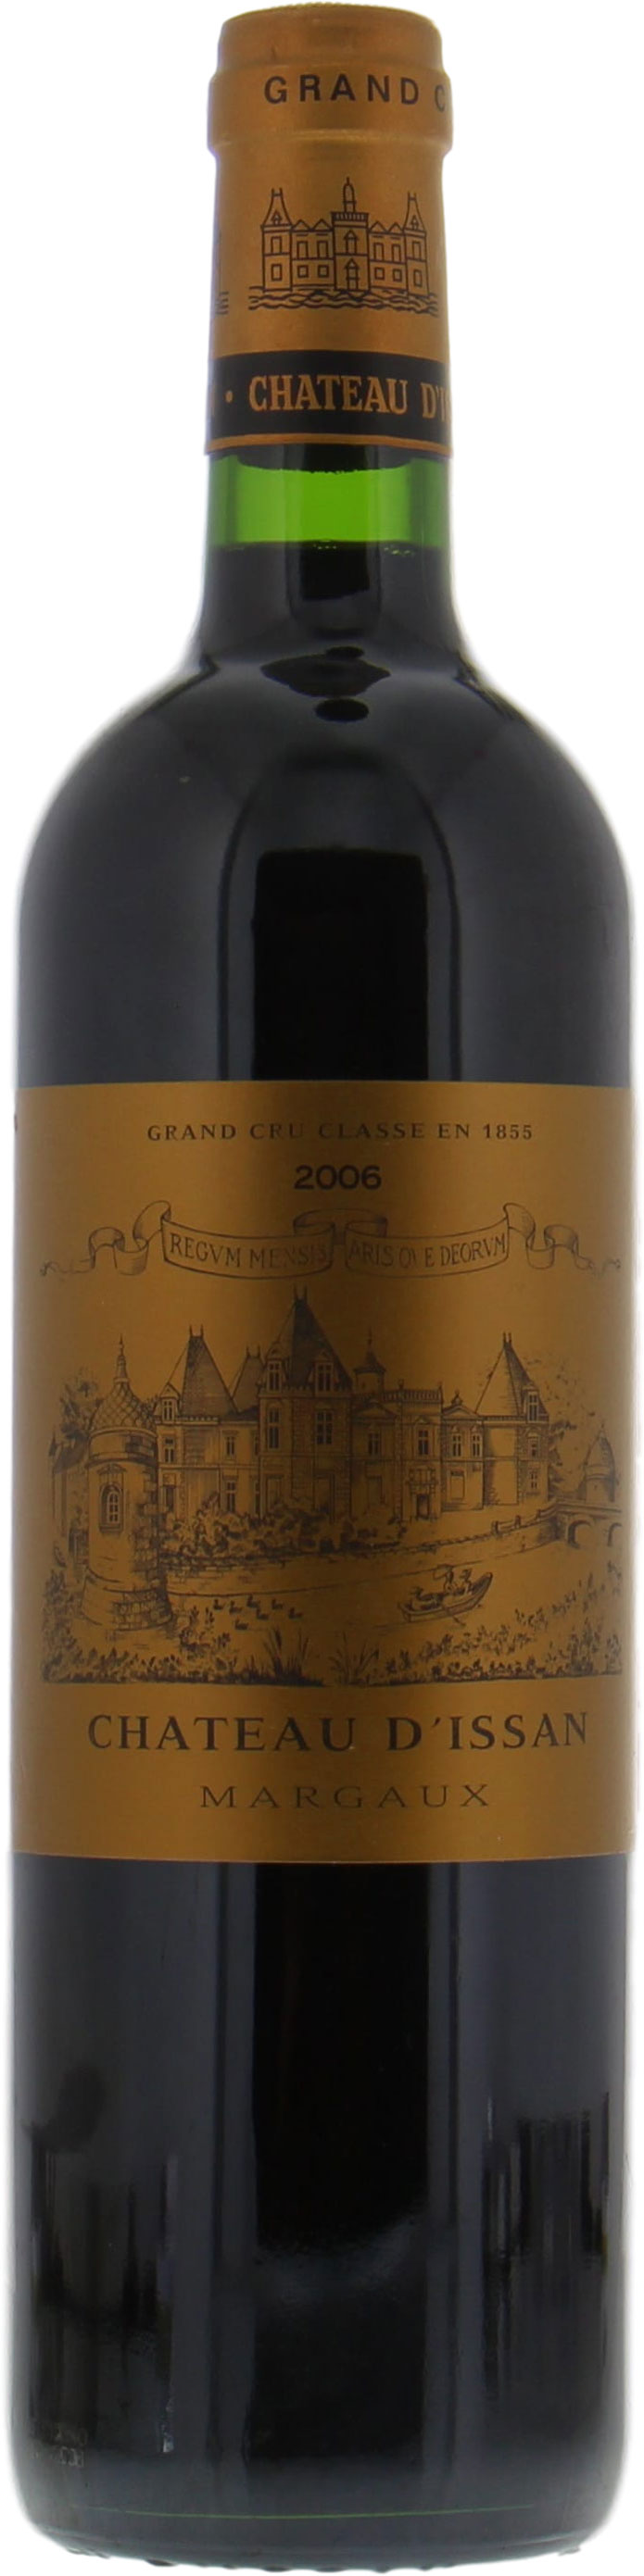 Chateau D'Issan - Chateau D'Issan 2006 perfect